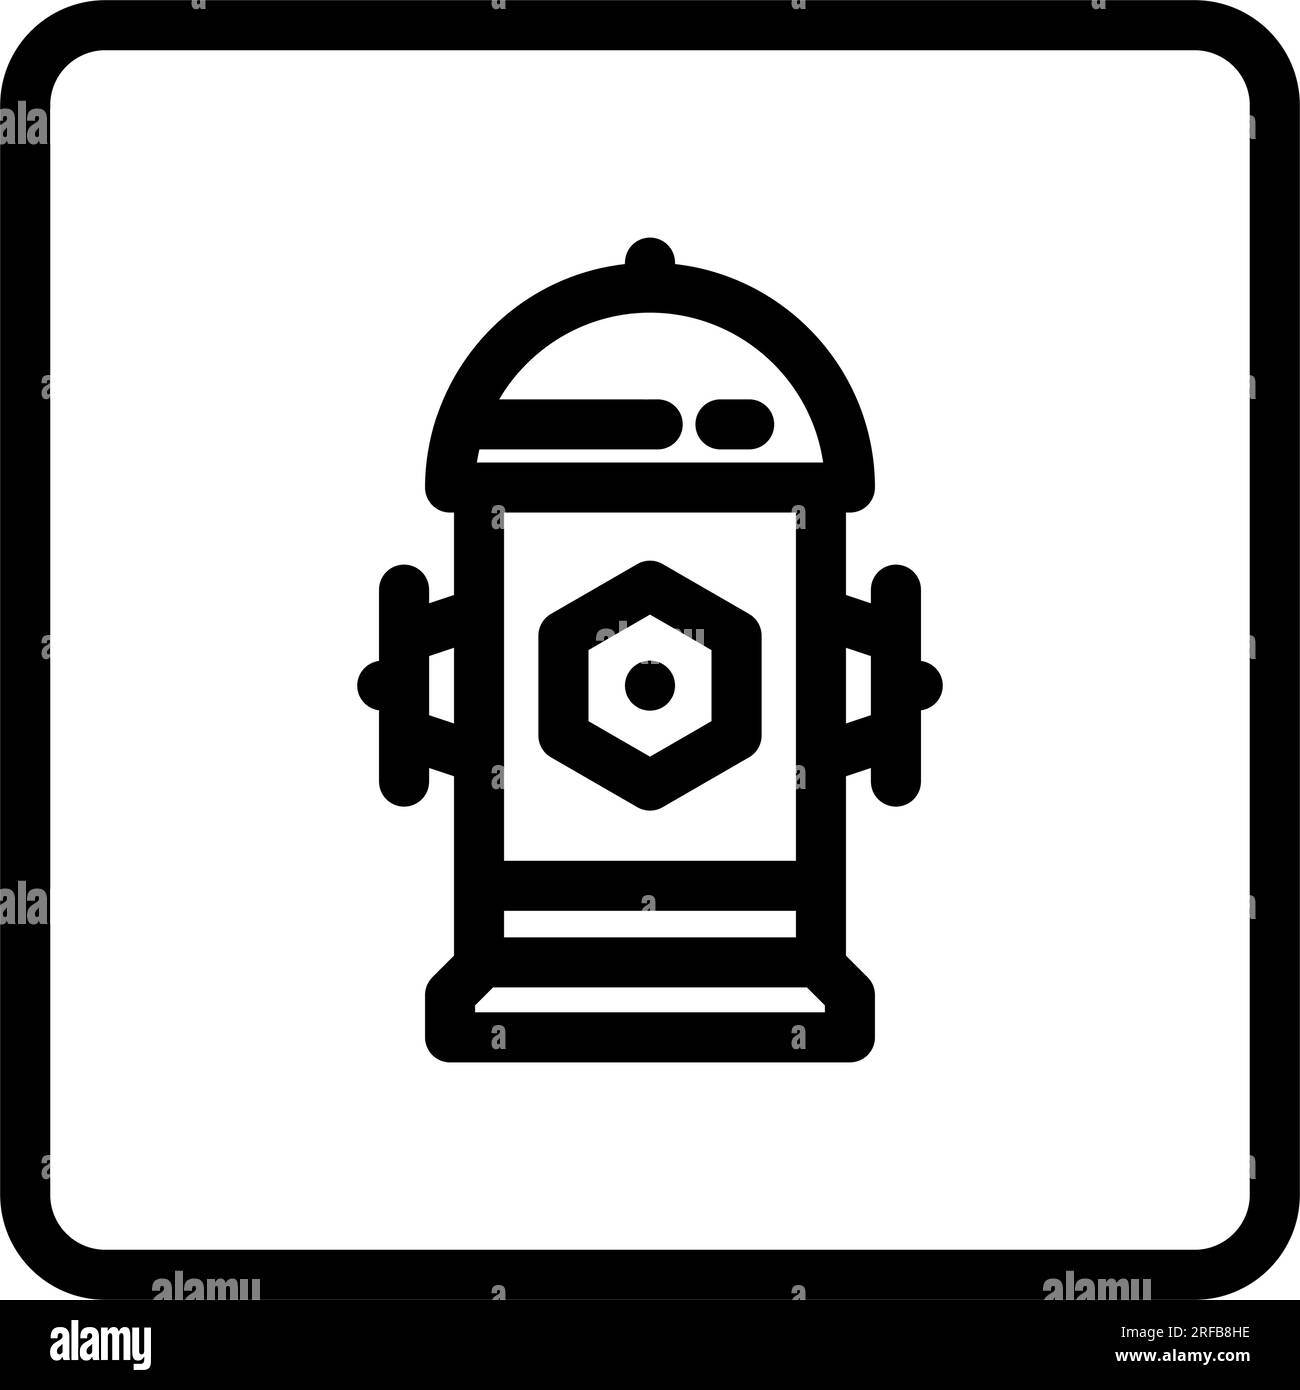 fire hydrant emergency line icon vector illustration Stock Vector